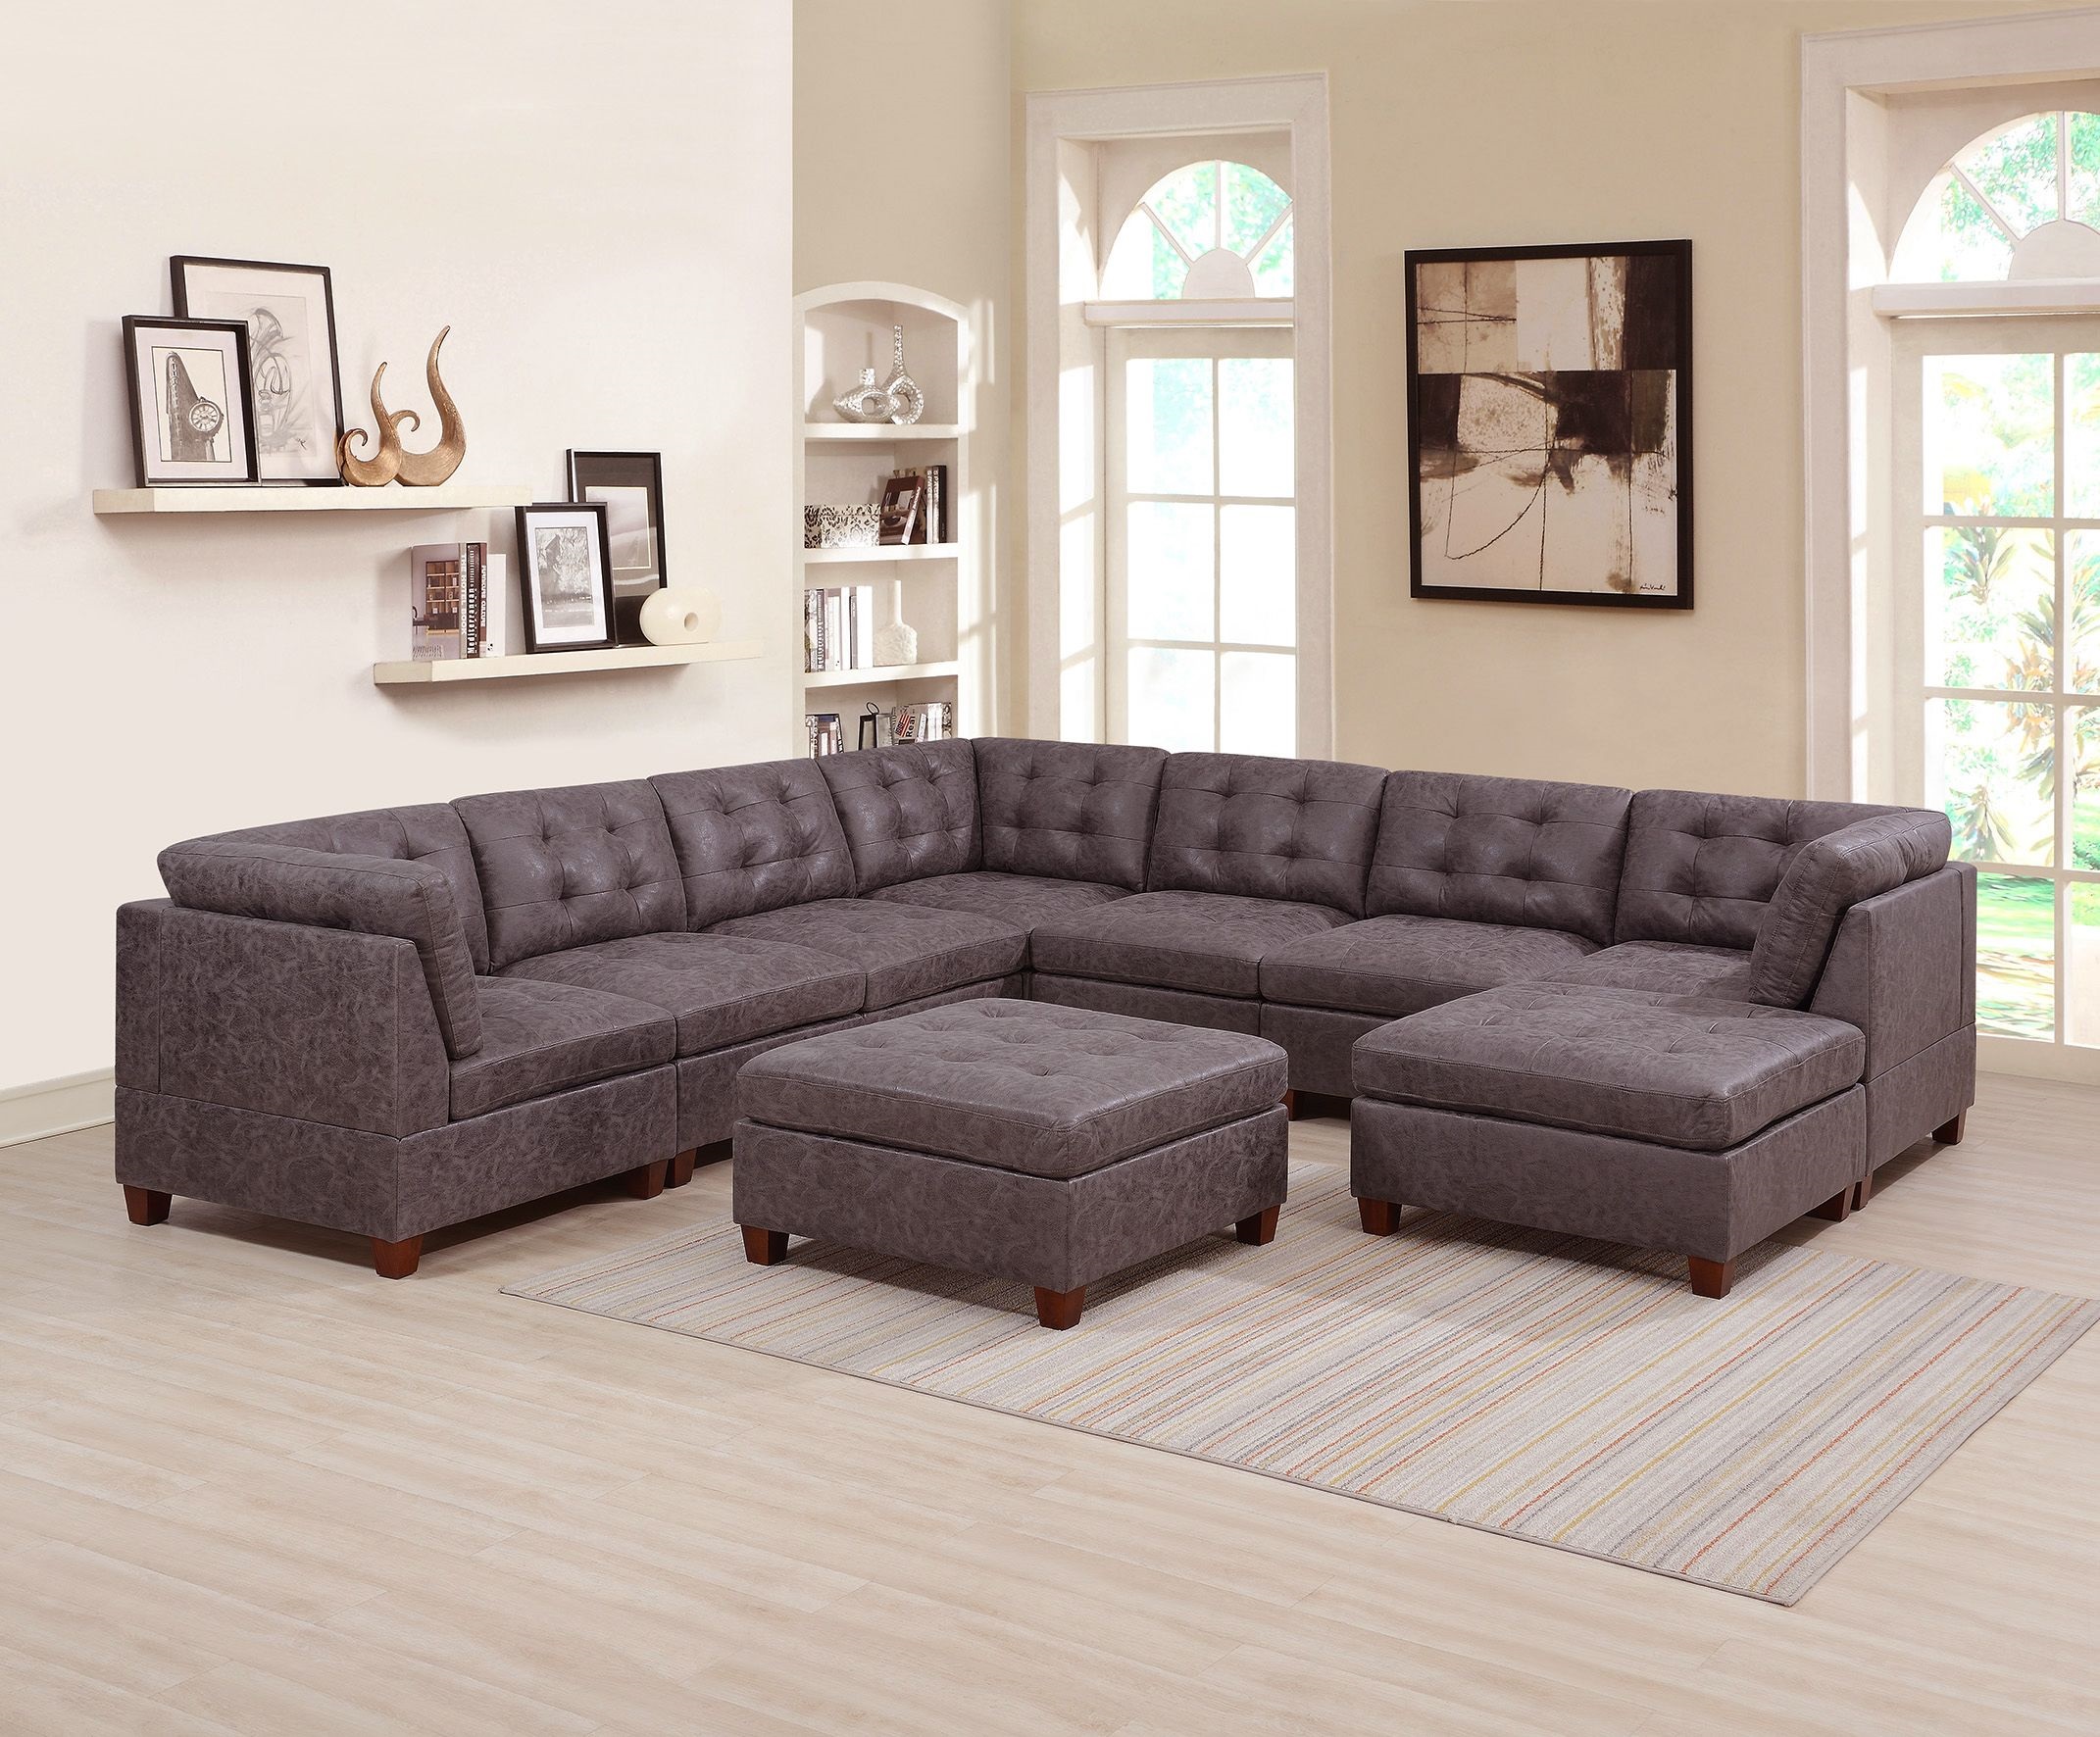 Esofa Unique Modern Leatherette, Living Room With Brown Sectional